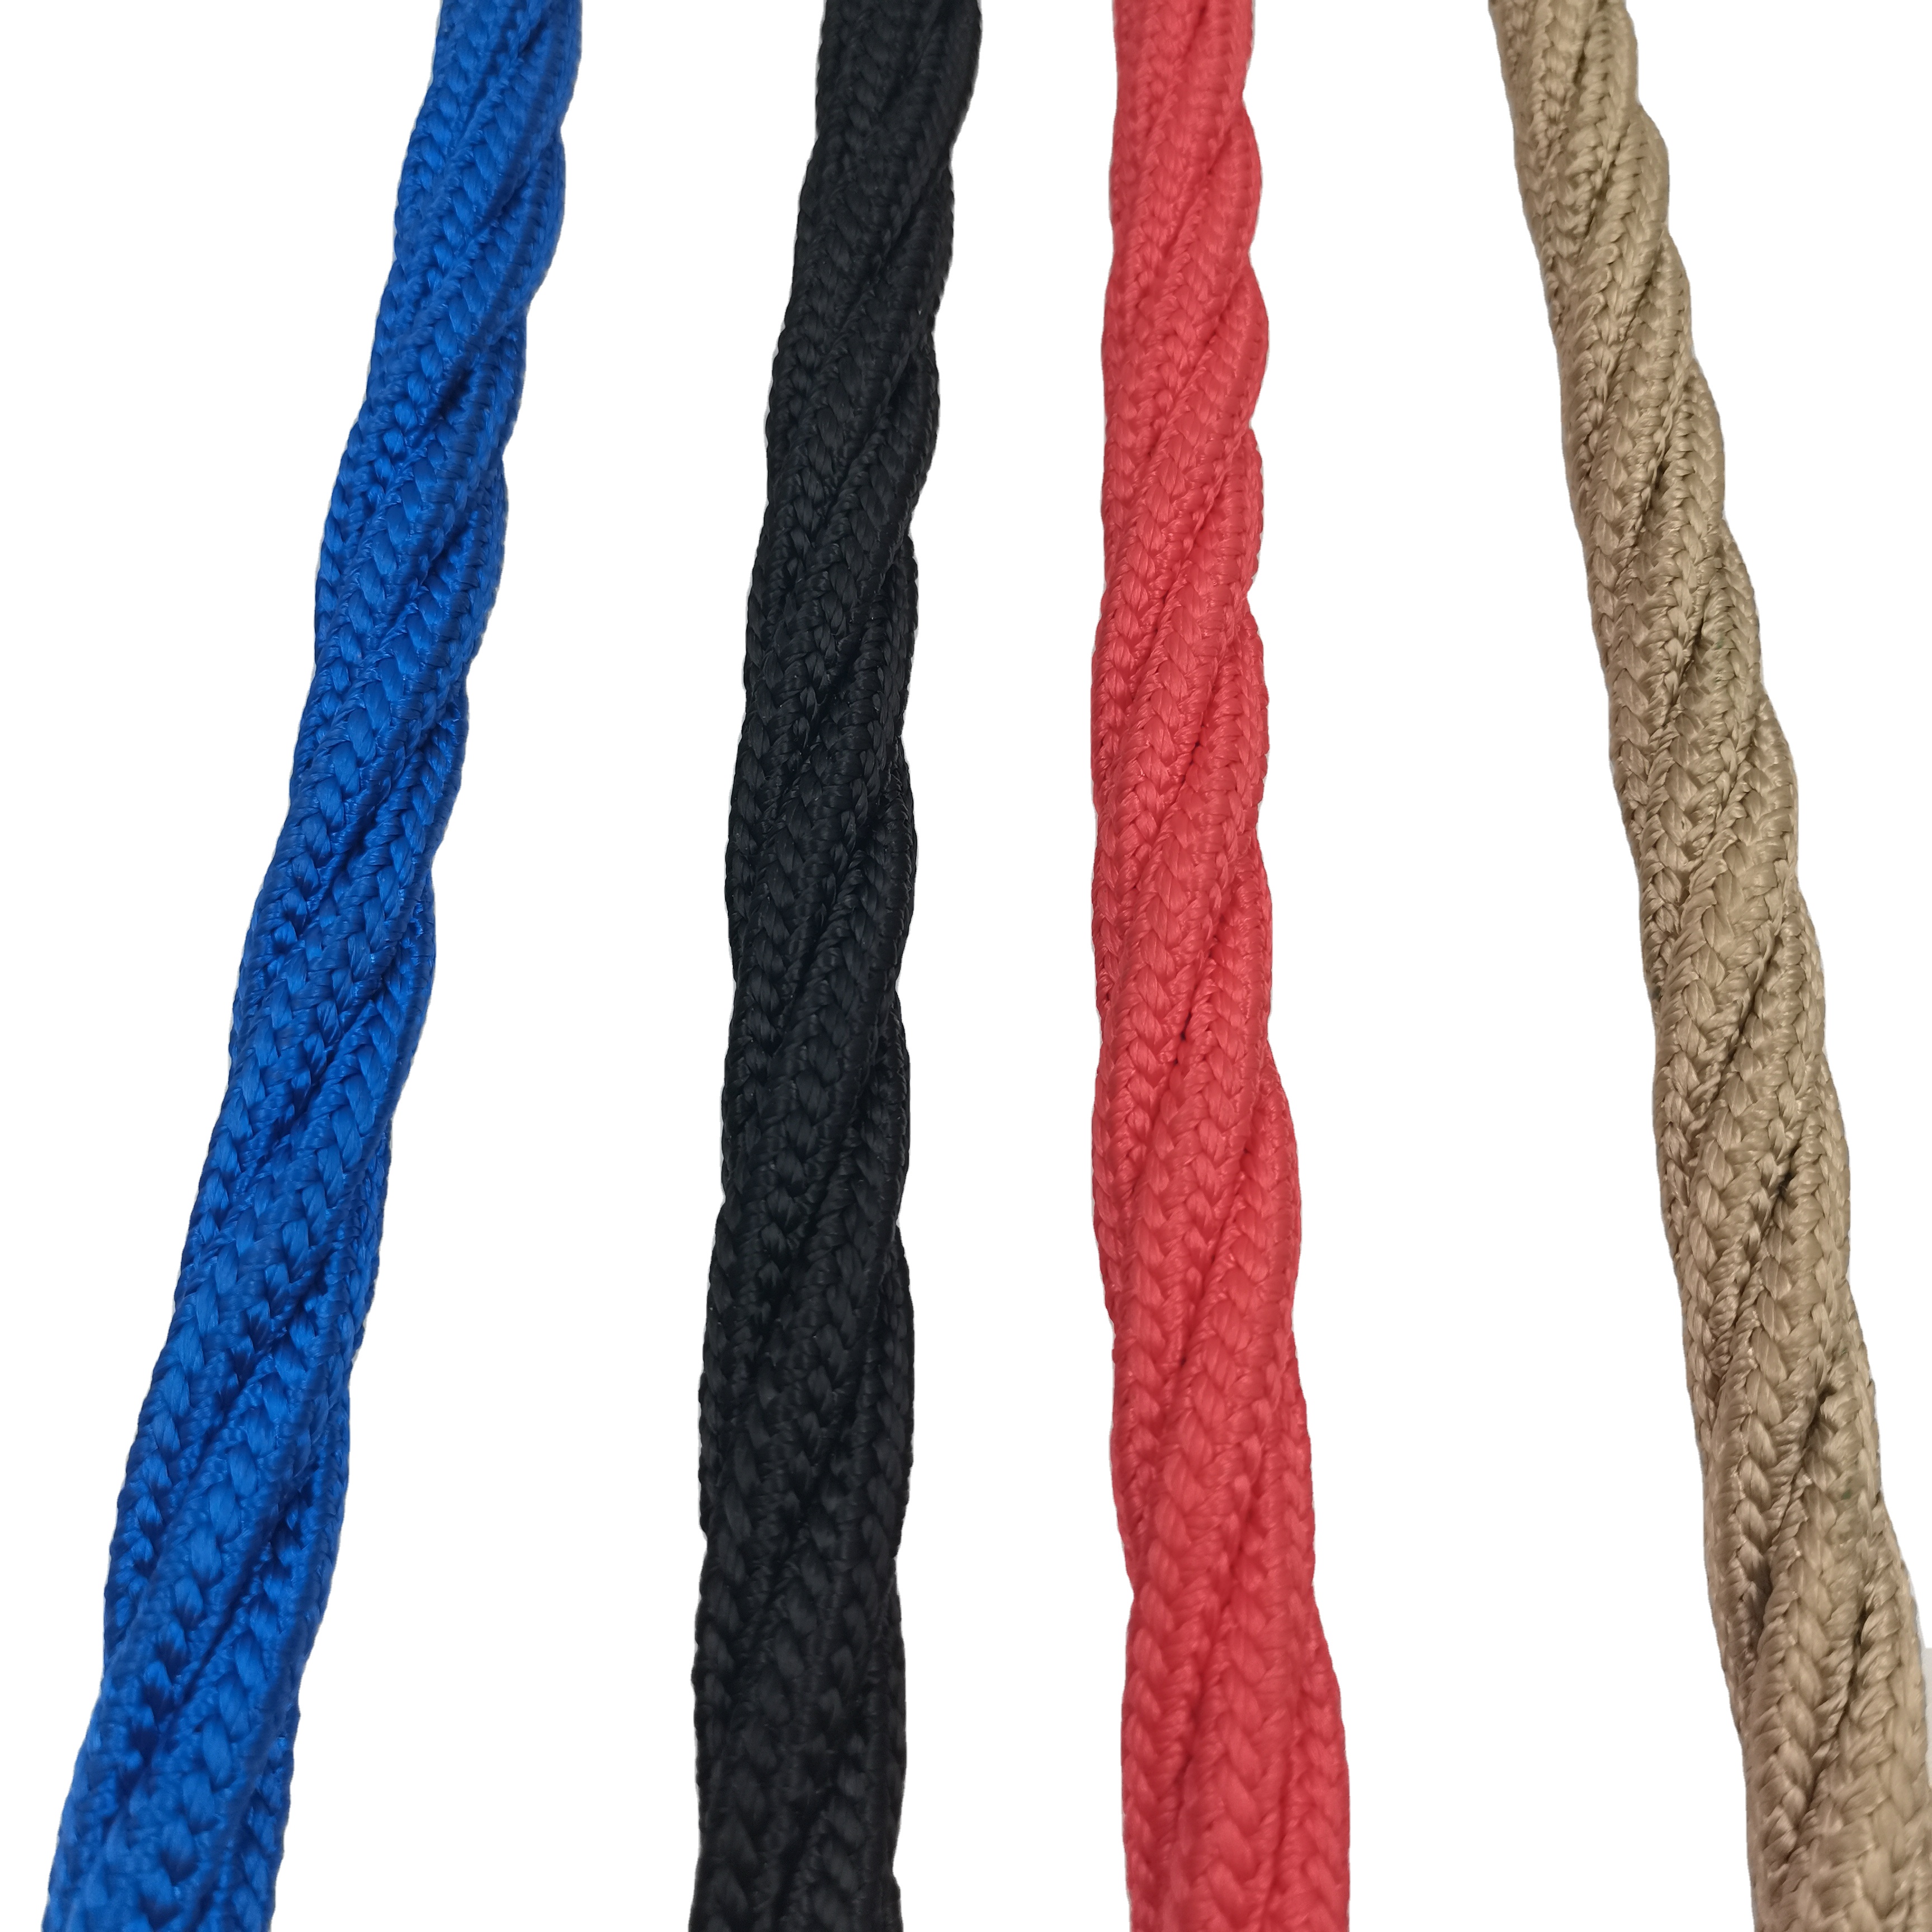 OEM/ODM China Sisal Fibre Twine - 16mm 4 Strands Polyester Combination Rope with Soft Performance – Florescence